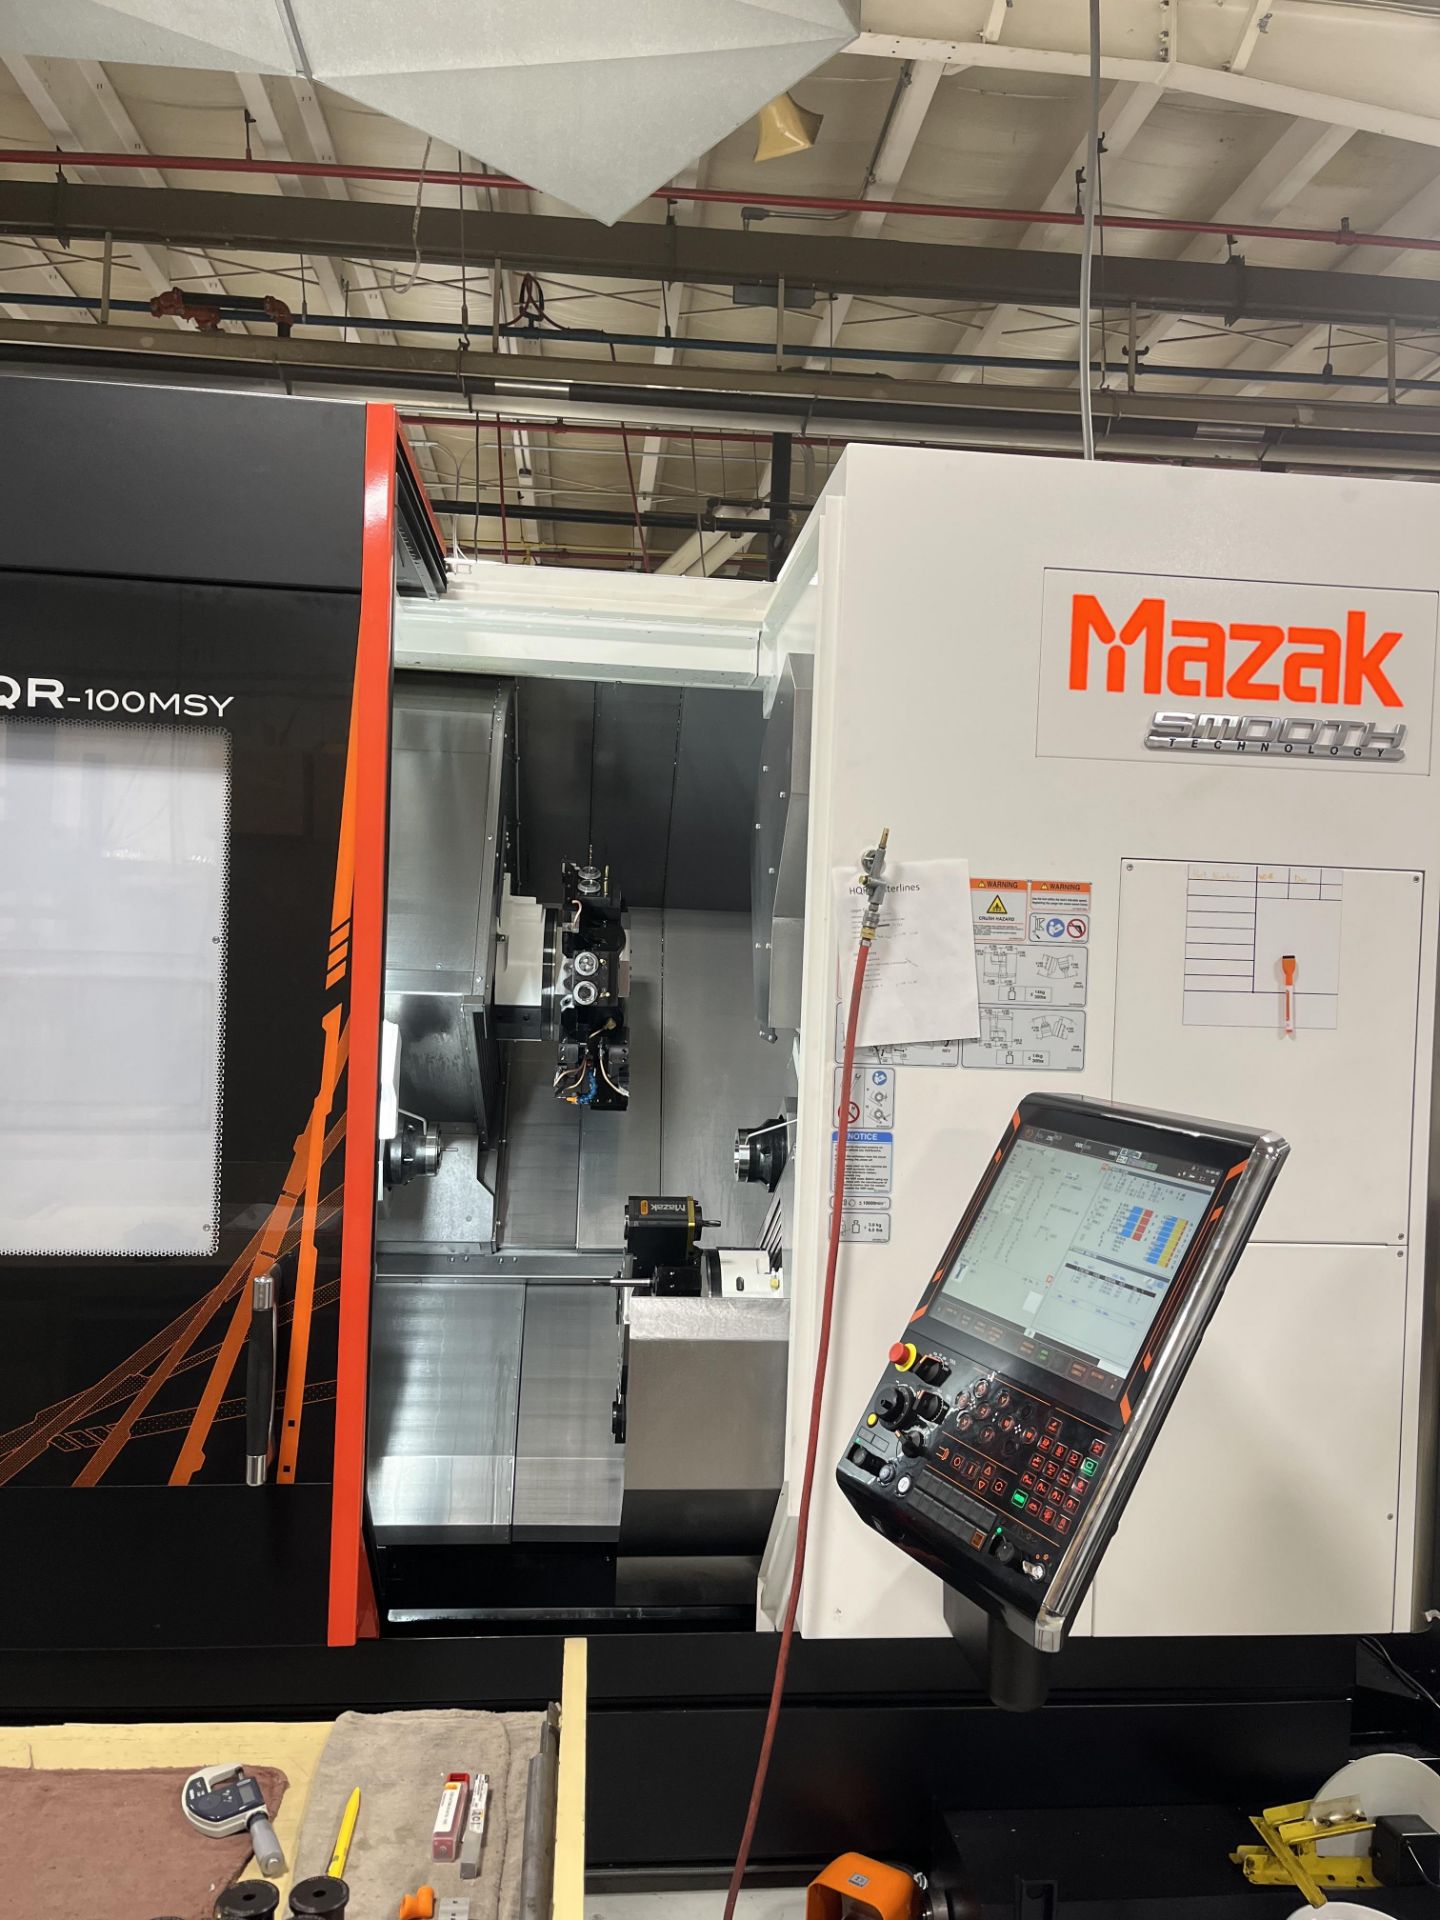 2022 Mazak HQR-100MSY Twin Turret / Twin Spindle / Live Tooling / Bar Feeder CNC Lathe